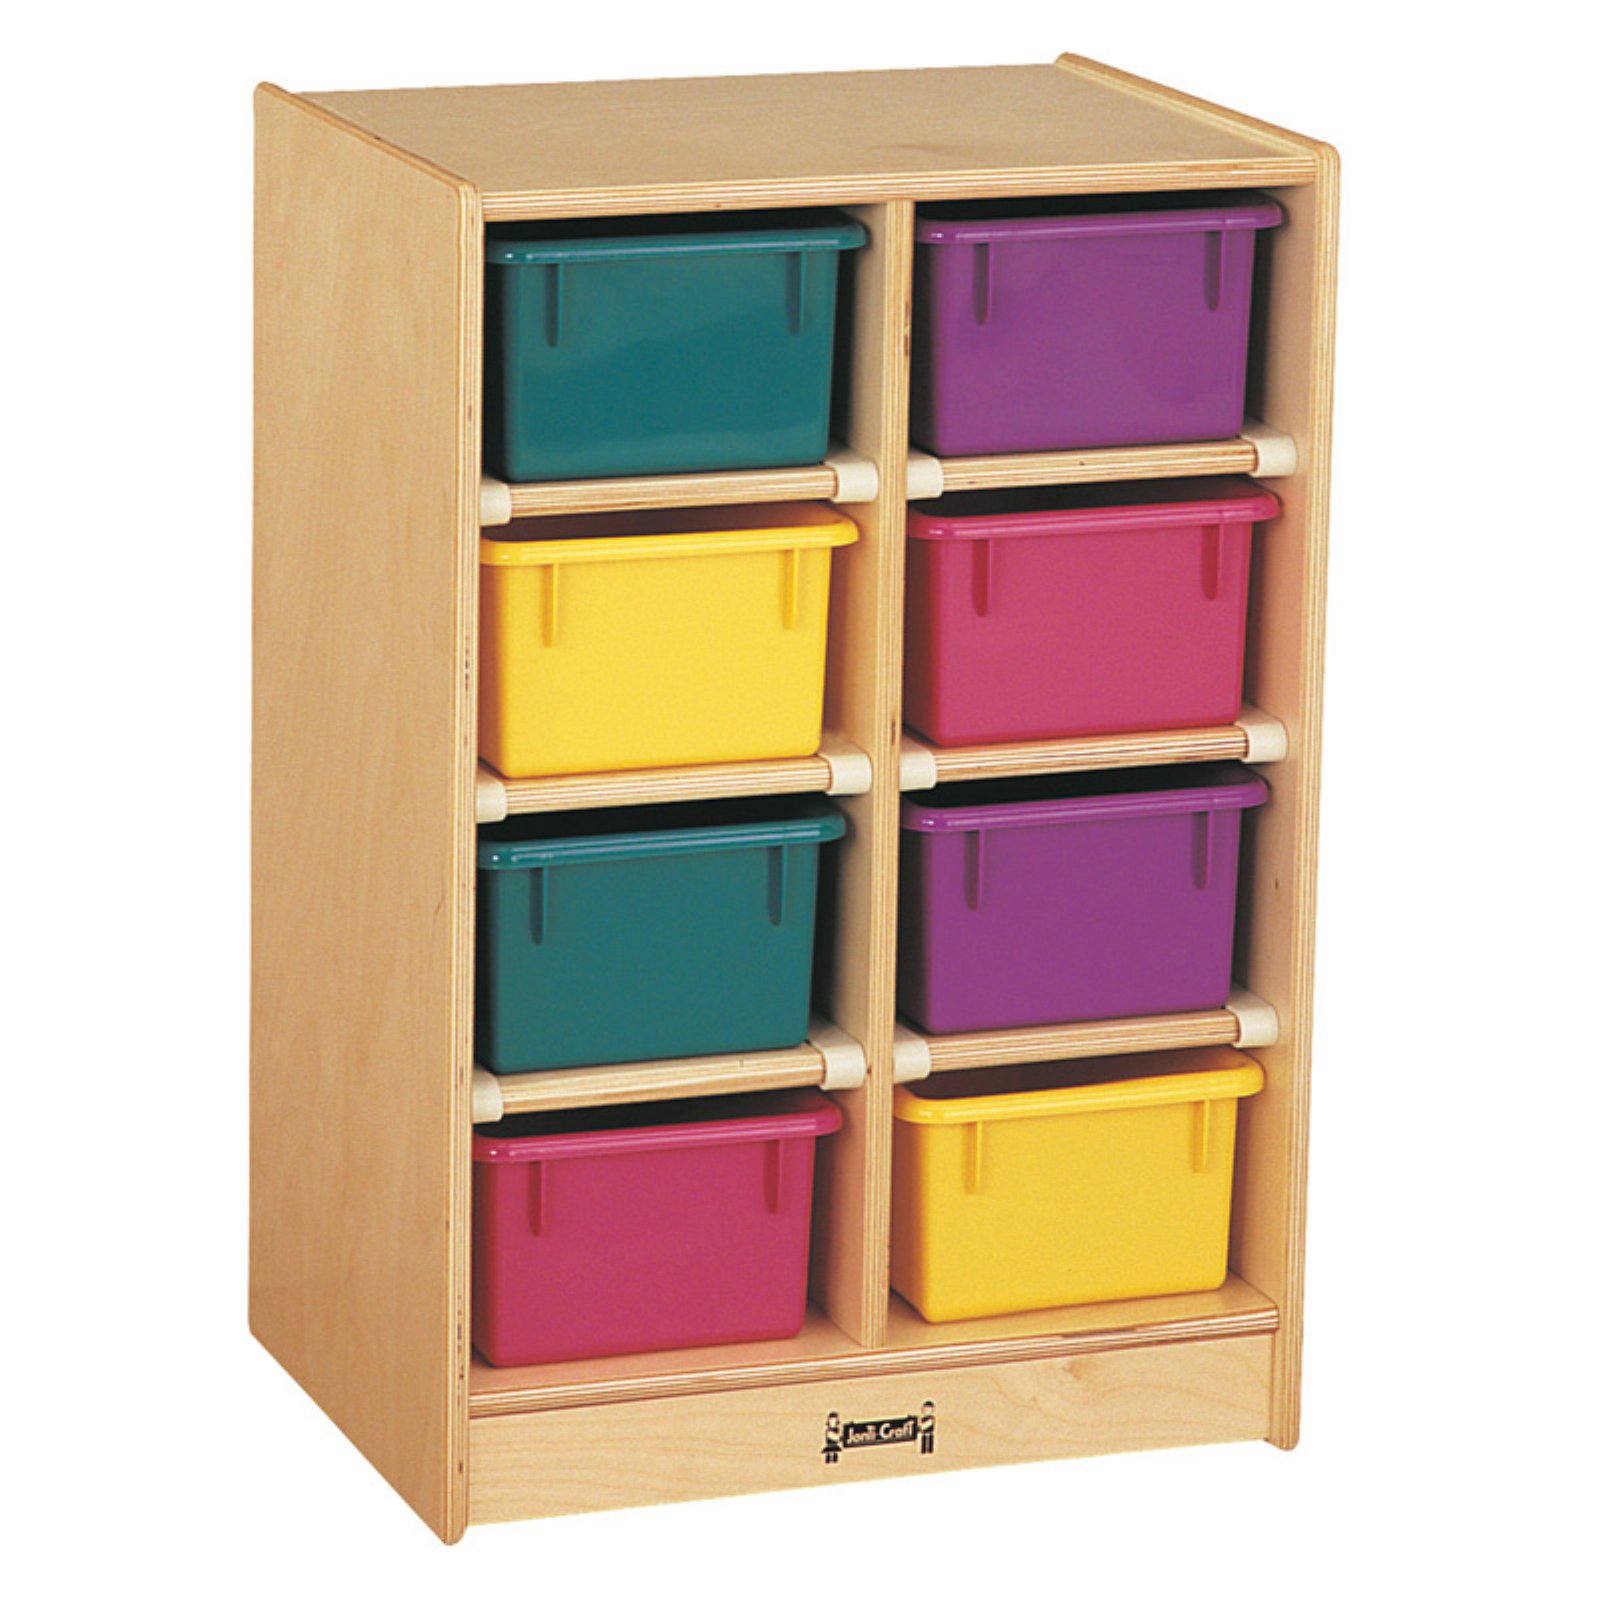 Kydz 10 Tray Mobile Storage Cubbie - image 3 of 3